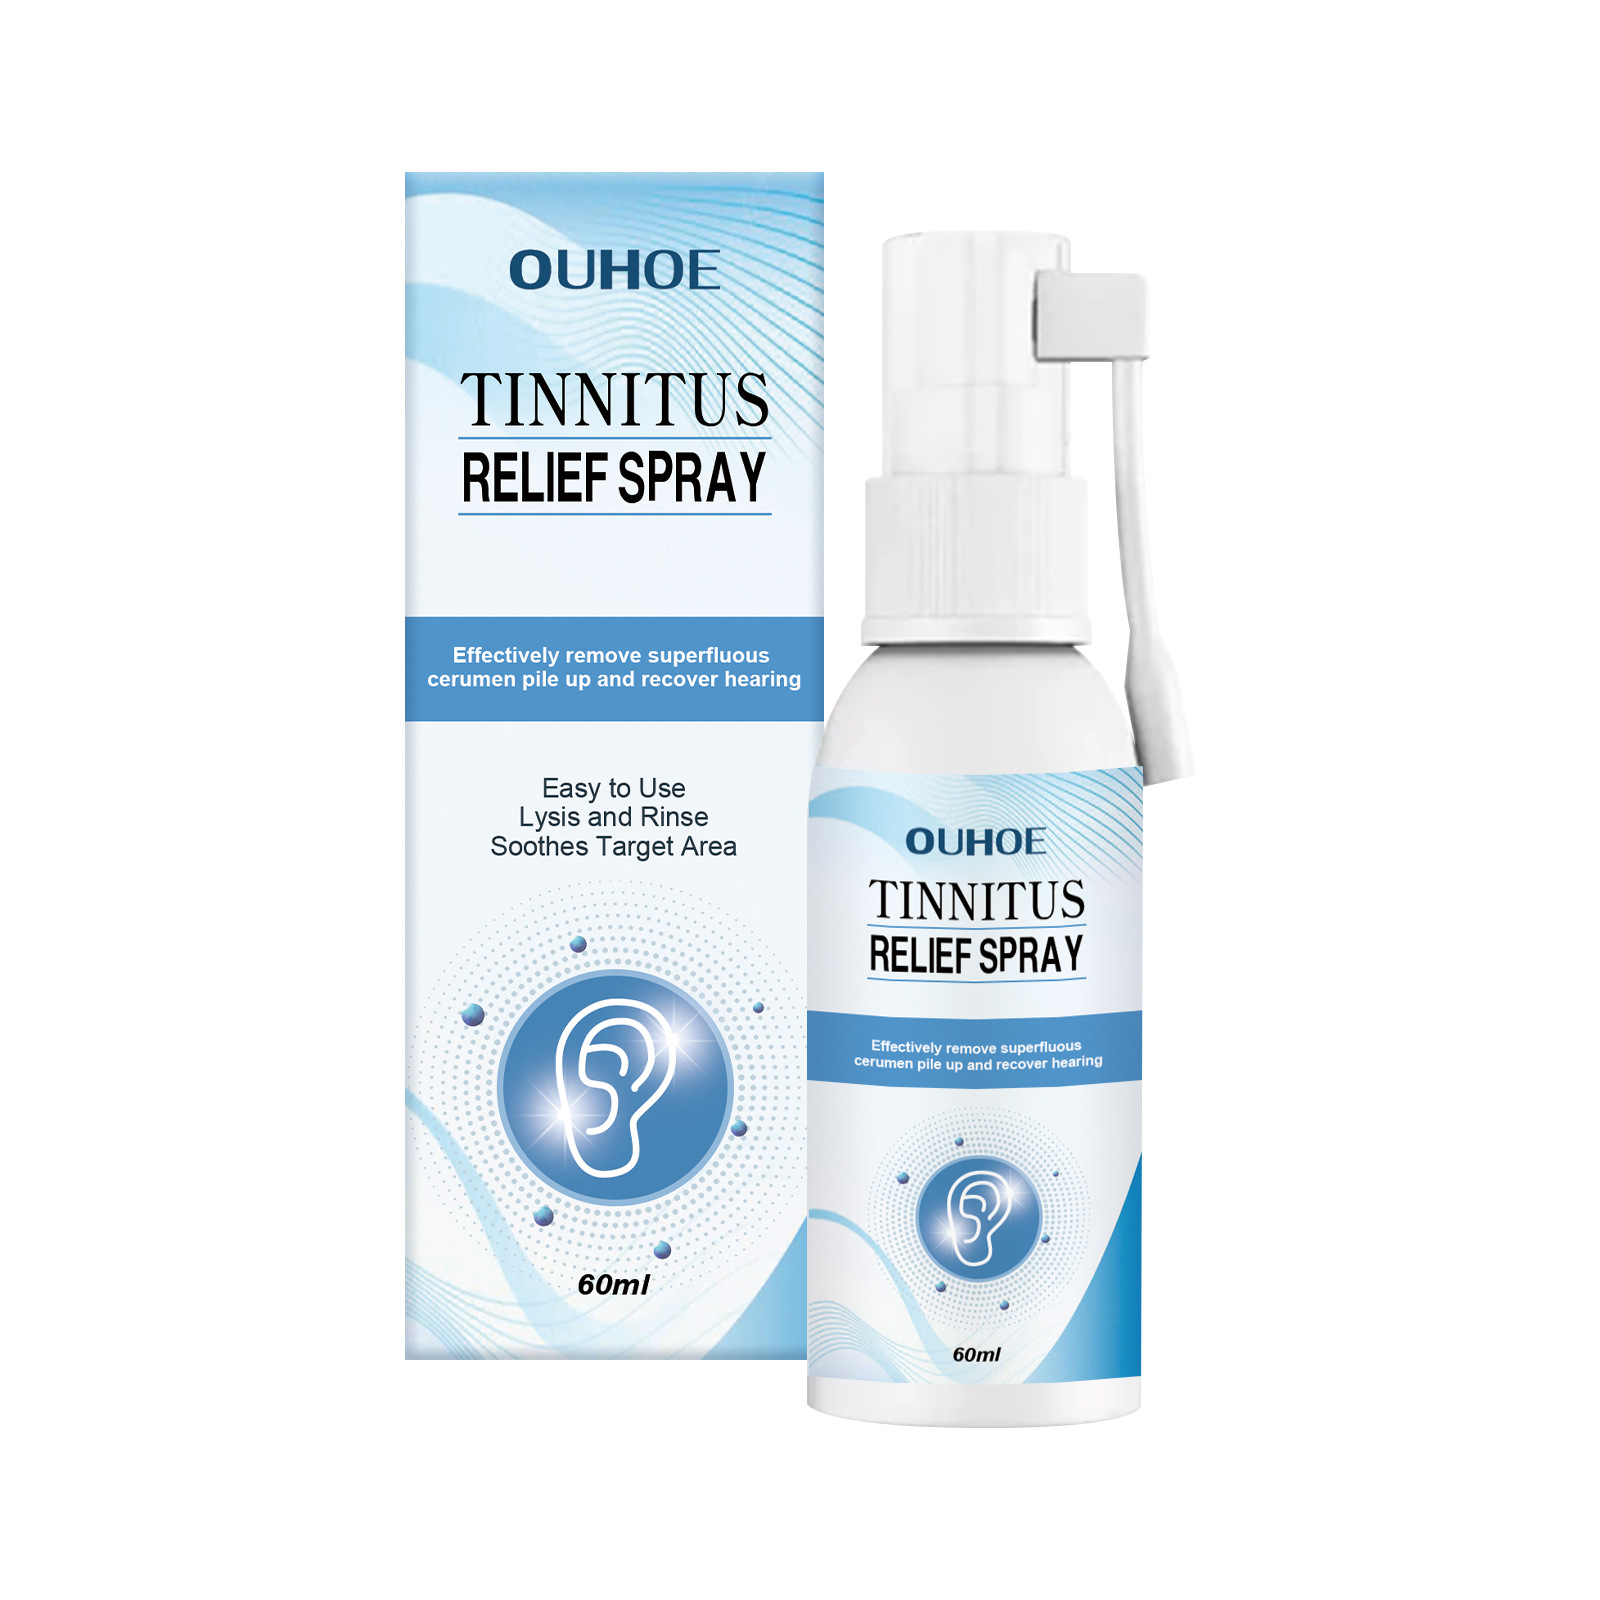 Ouhoe Tinnitus Relief Spray